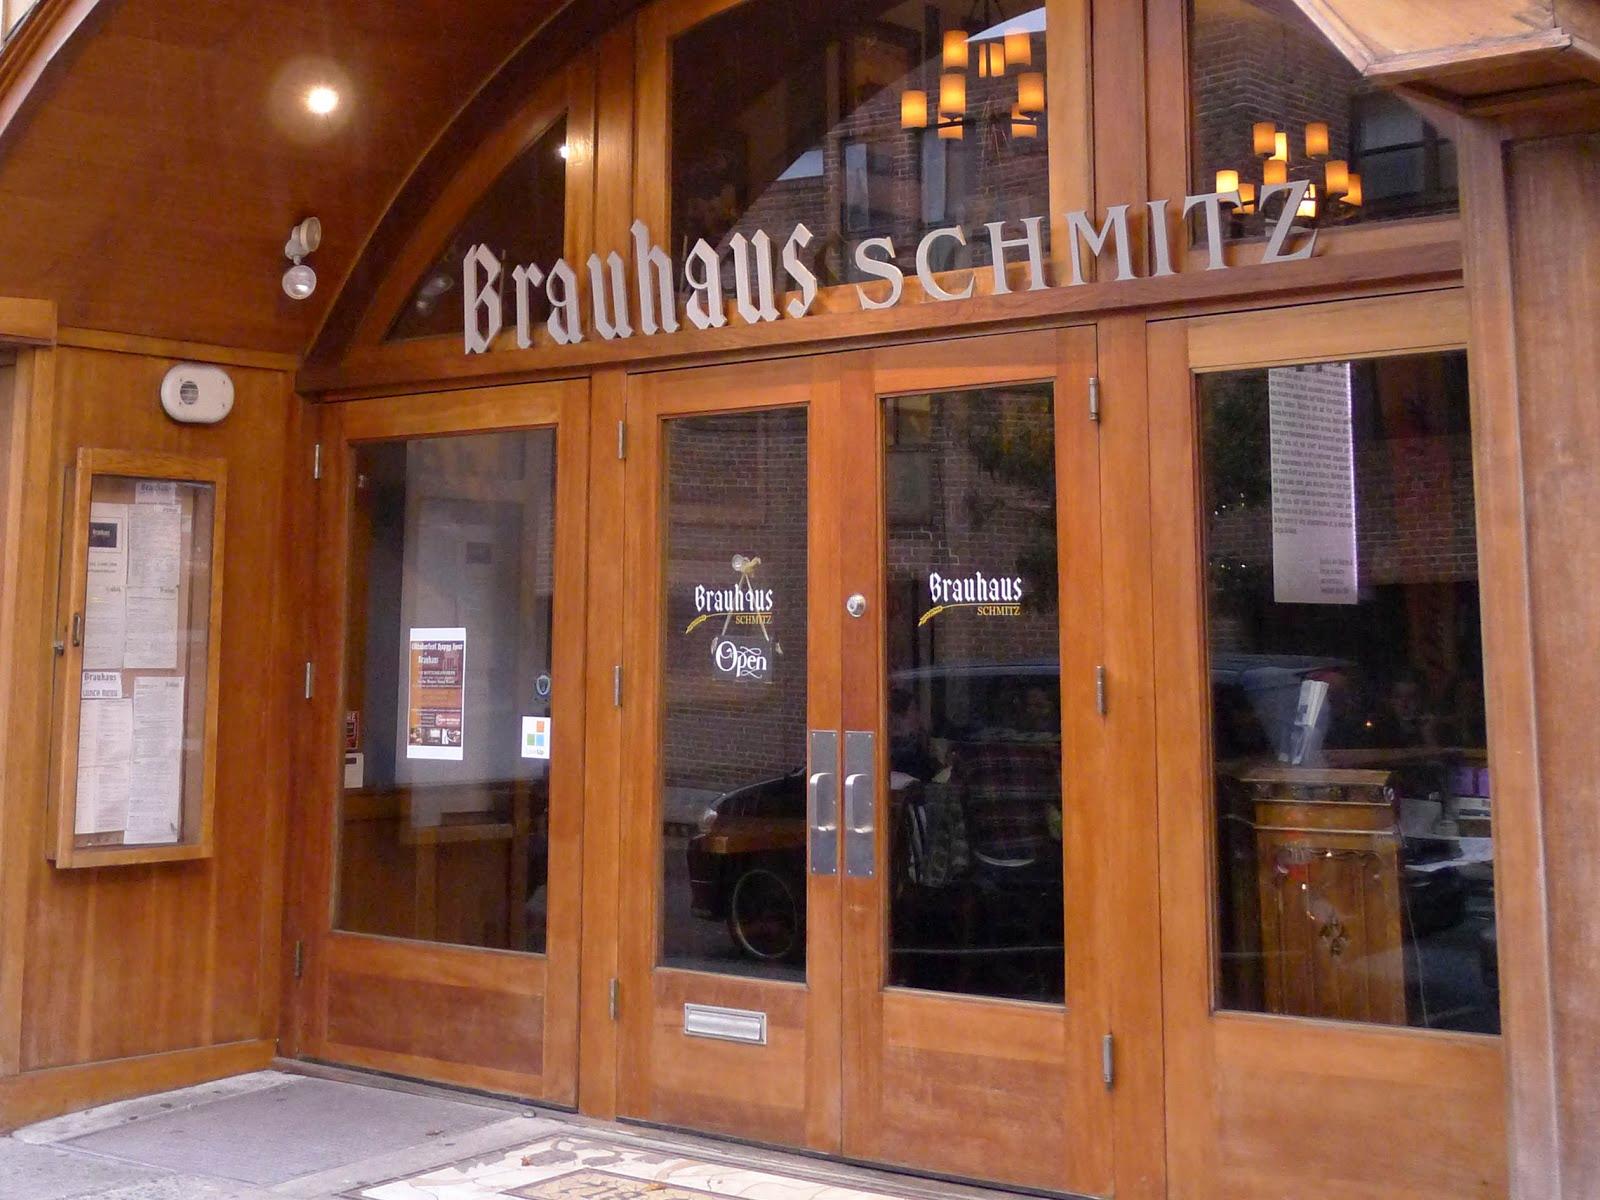 Cover image of this place Brauhaus Schmitz